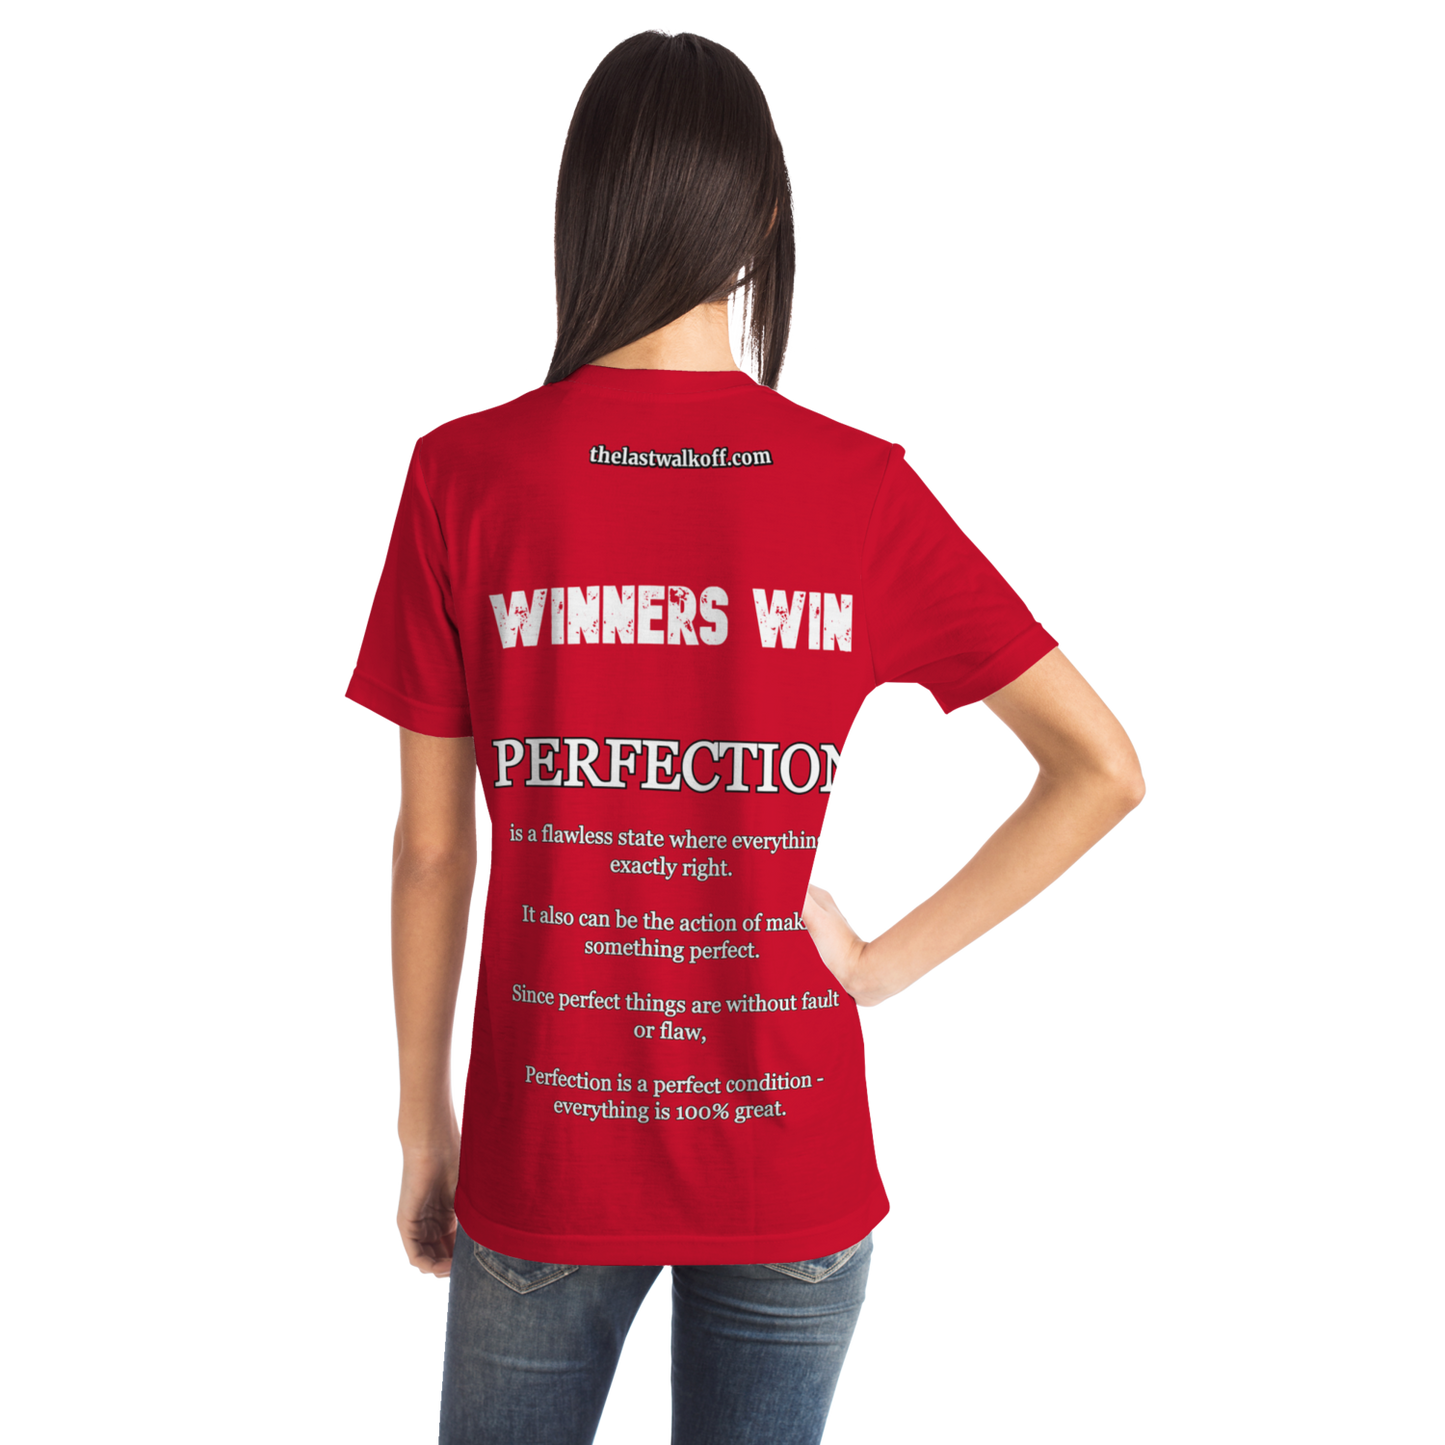 Perfection is a Necessity Winners Win T-Shirt Red